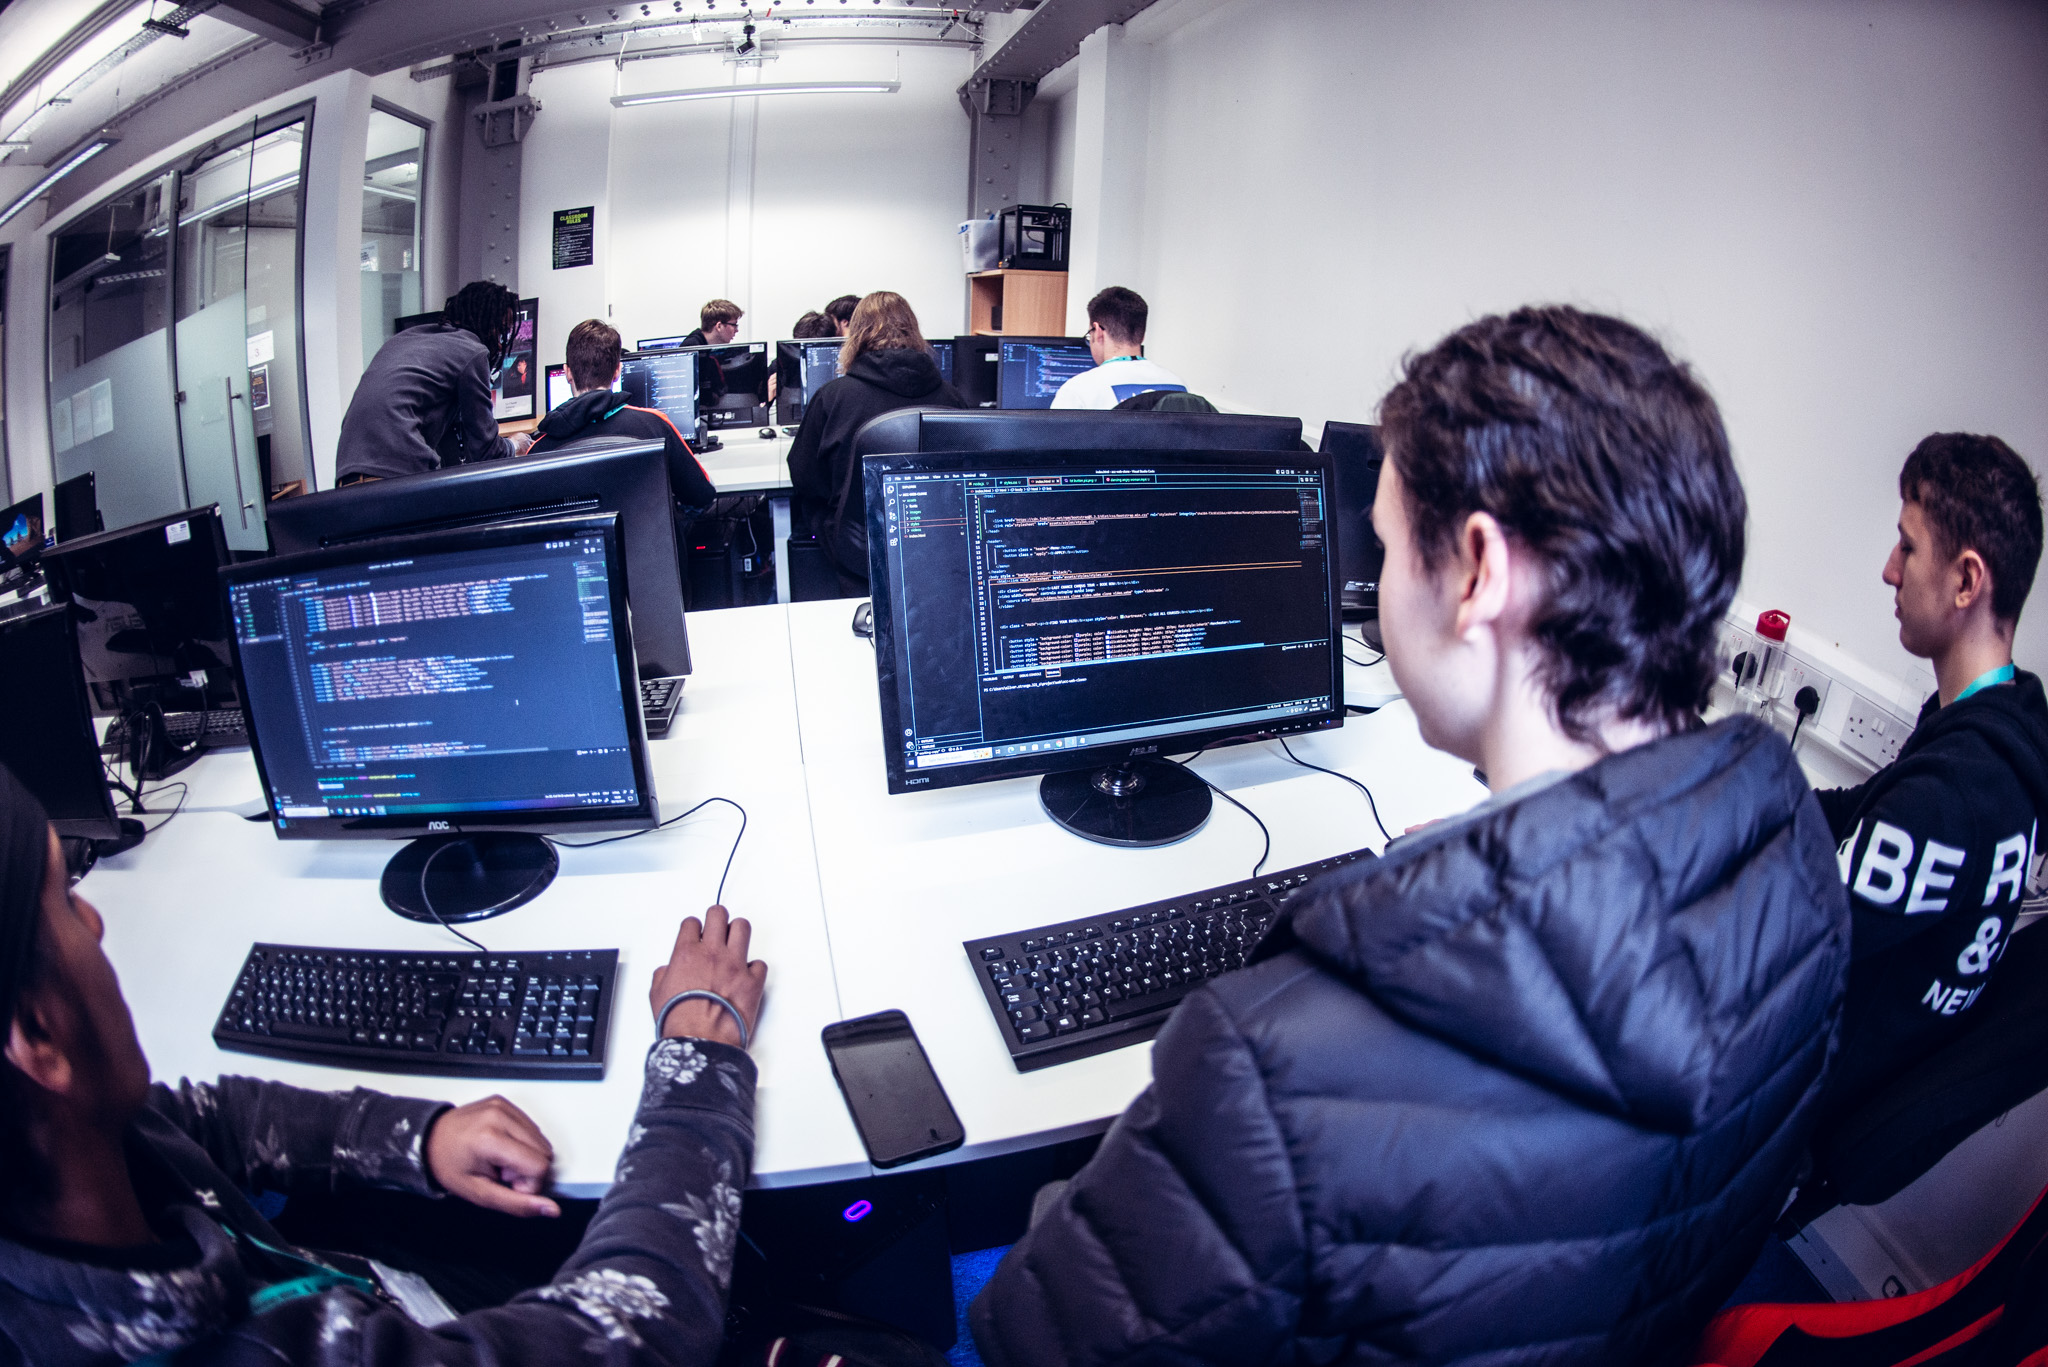 Discover more about software development courses in the UK